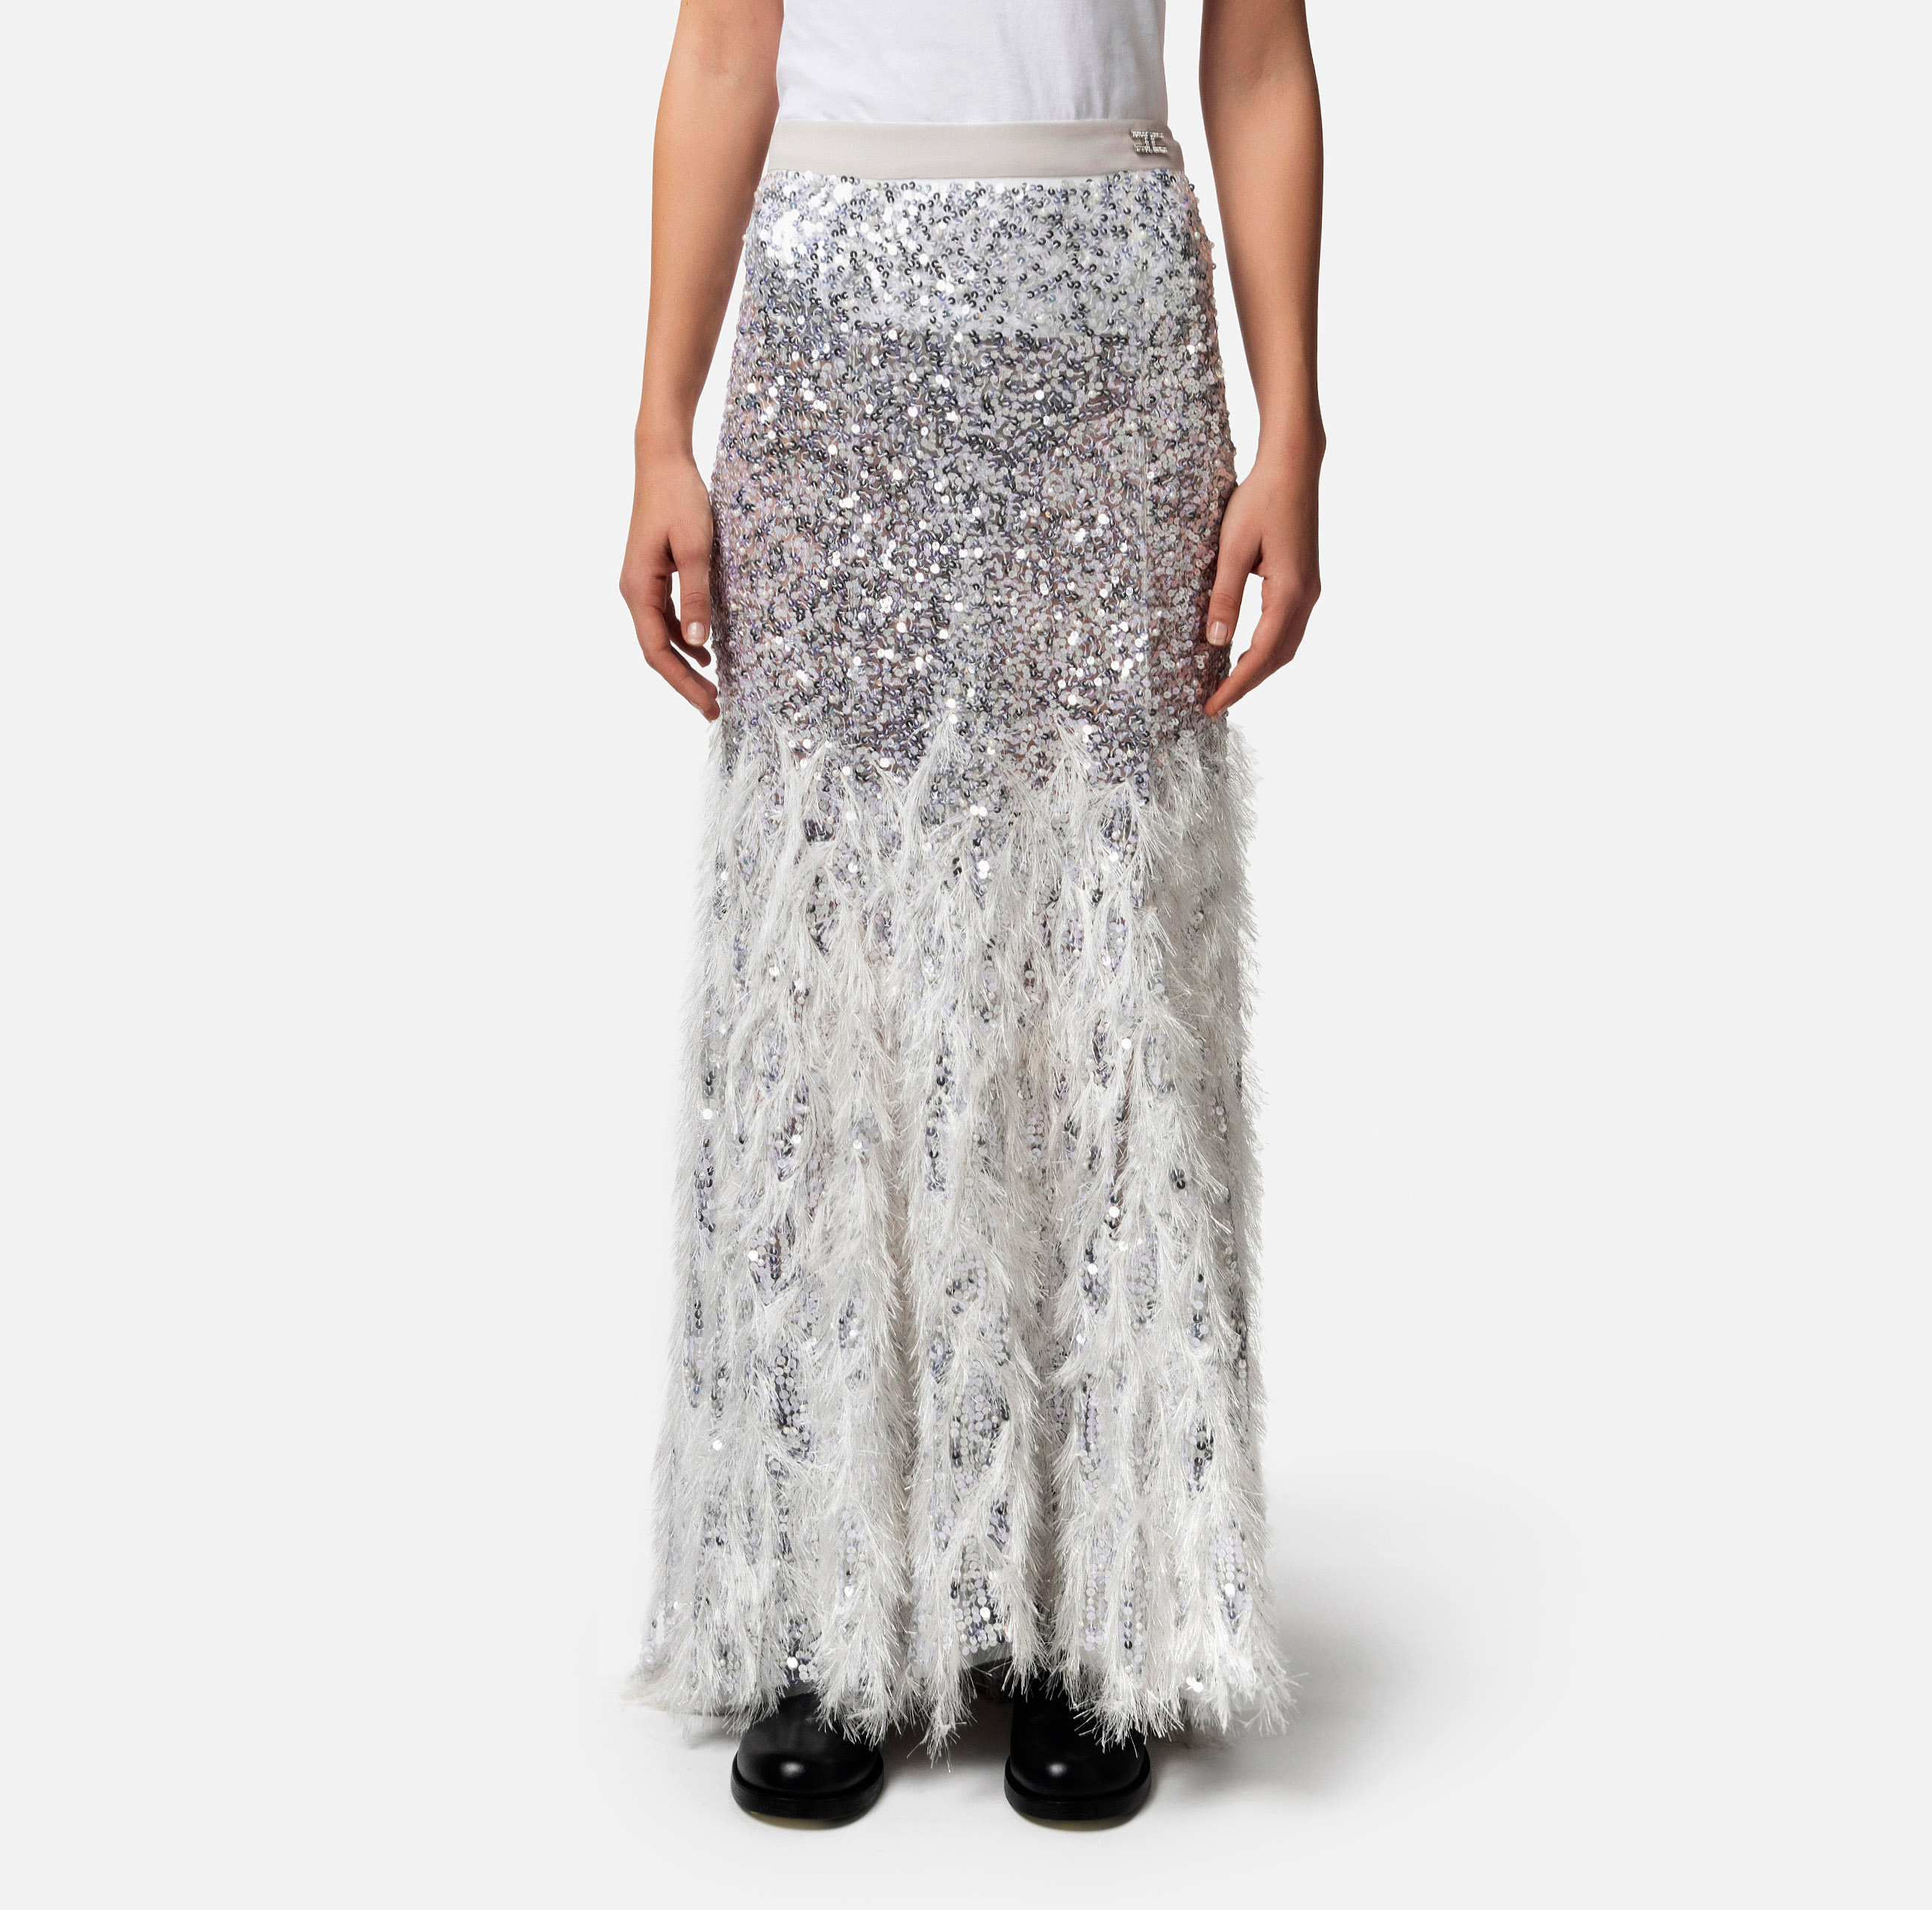 Embroidered long skirt in tulle fabric - Elisabetta Franchi